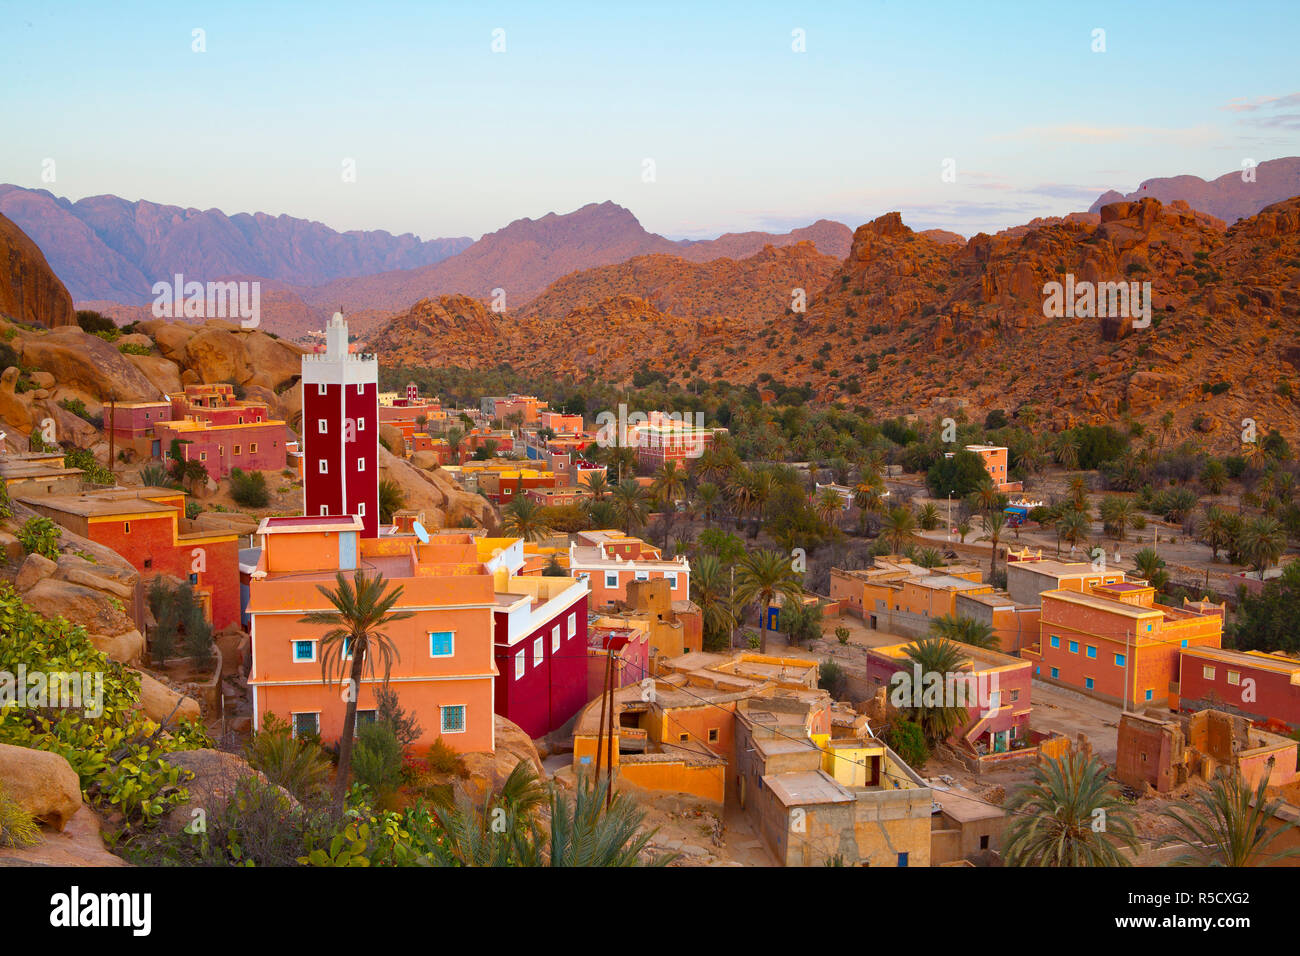 Elevated view over the Red Mosque of Adai, Tafraoute, Anti Atlas, Morocco Stock Photo